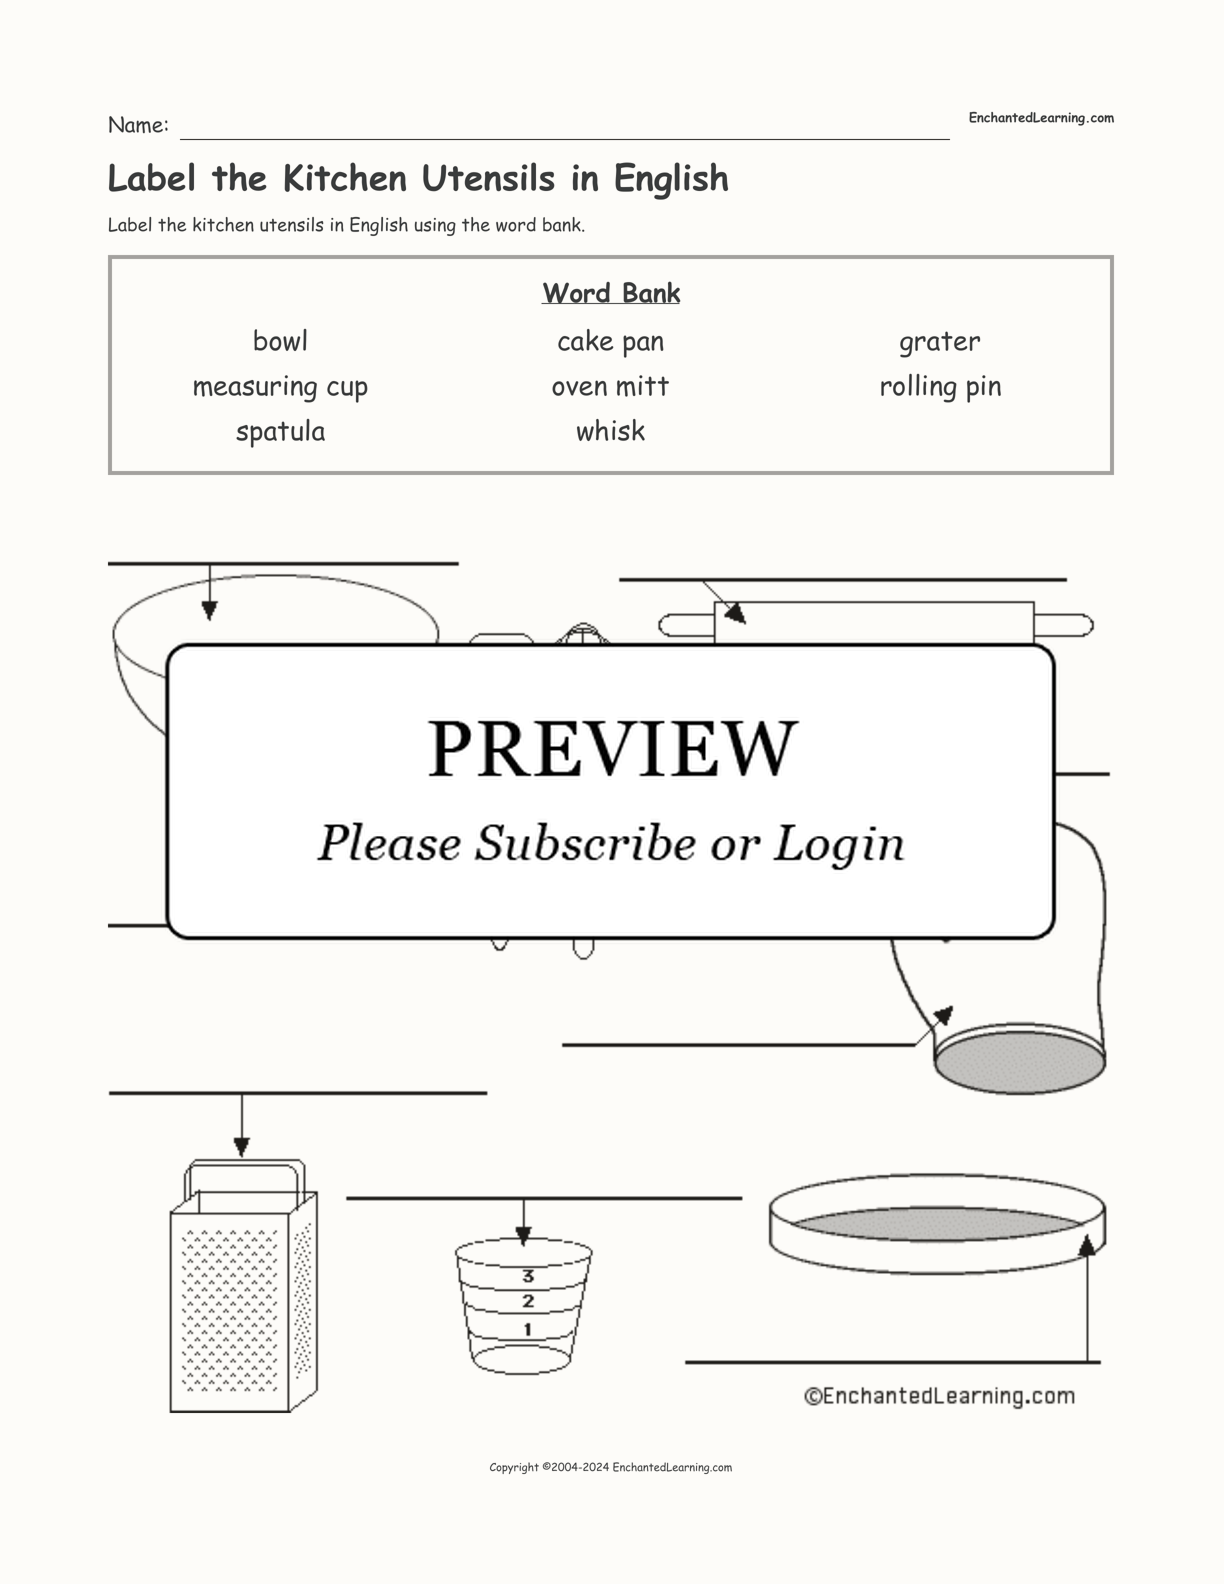 Label the Kitchen Utensils in English interactive worksheet page 1